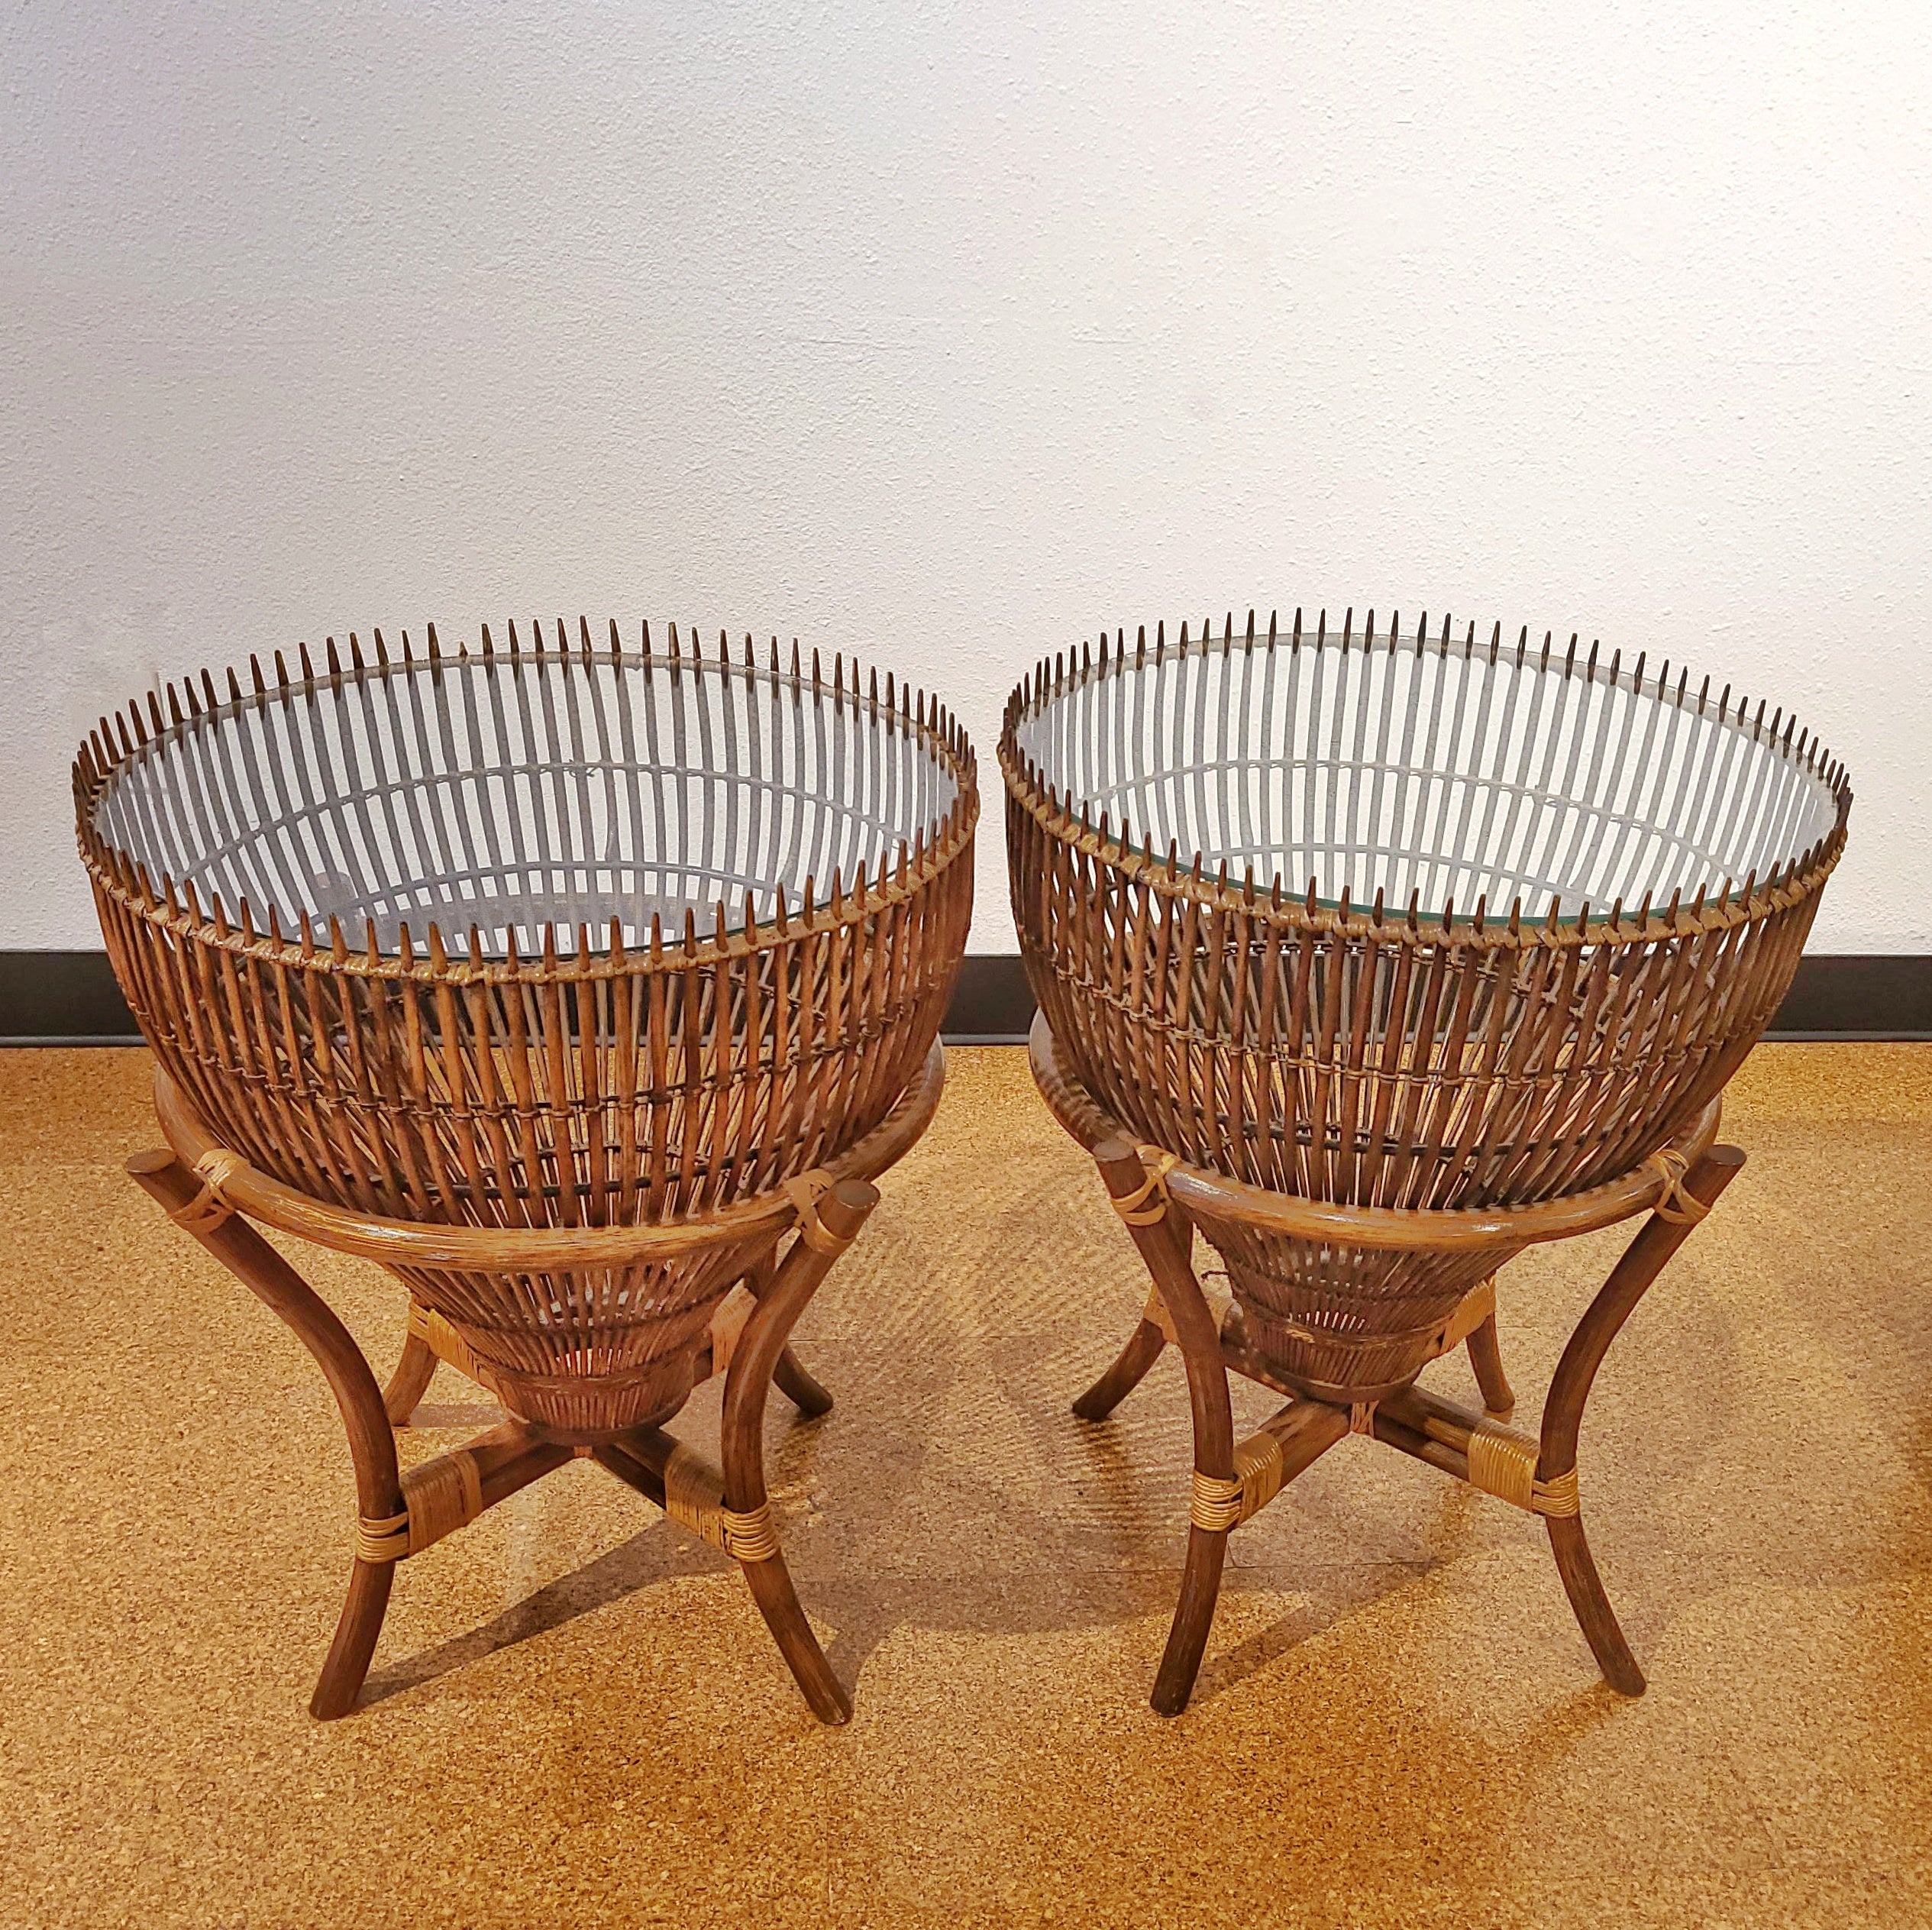 RATTAN AND GLASS “FISH-TRAP” SIDE TABLES IN THE STYLE OF FRANCO ALBINI